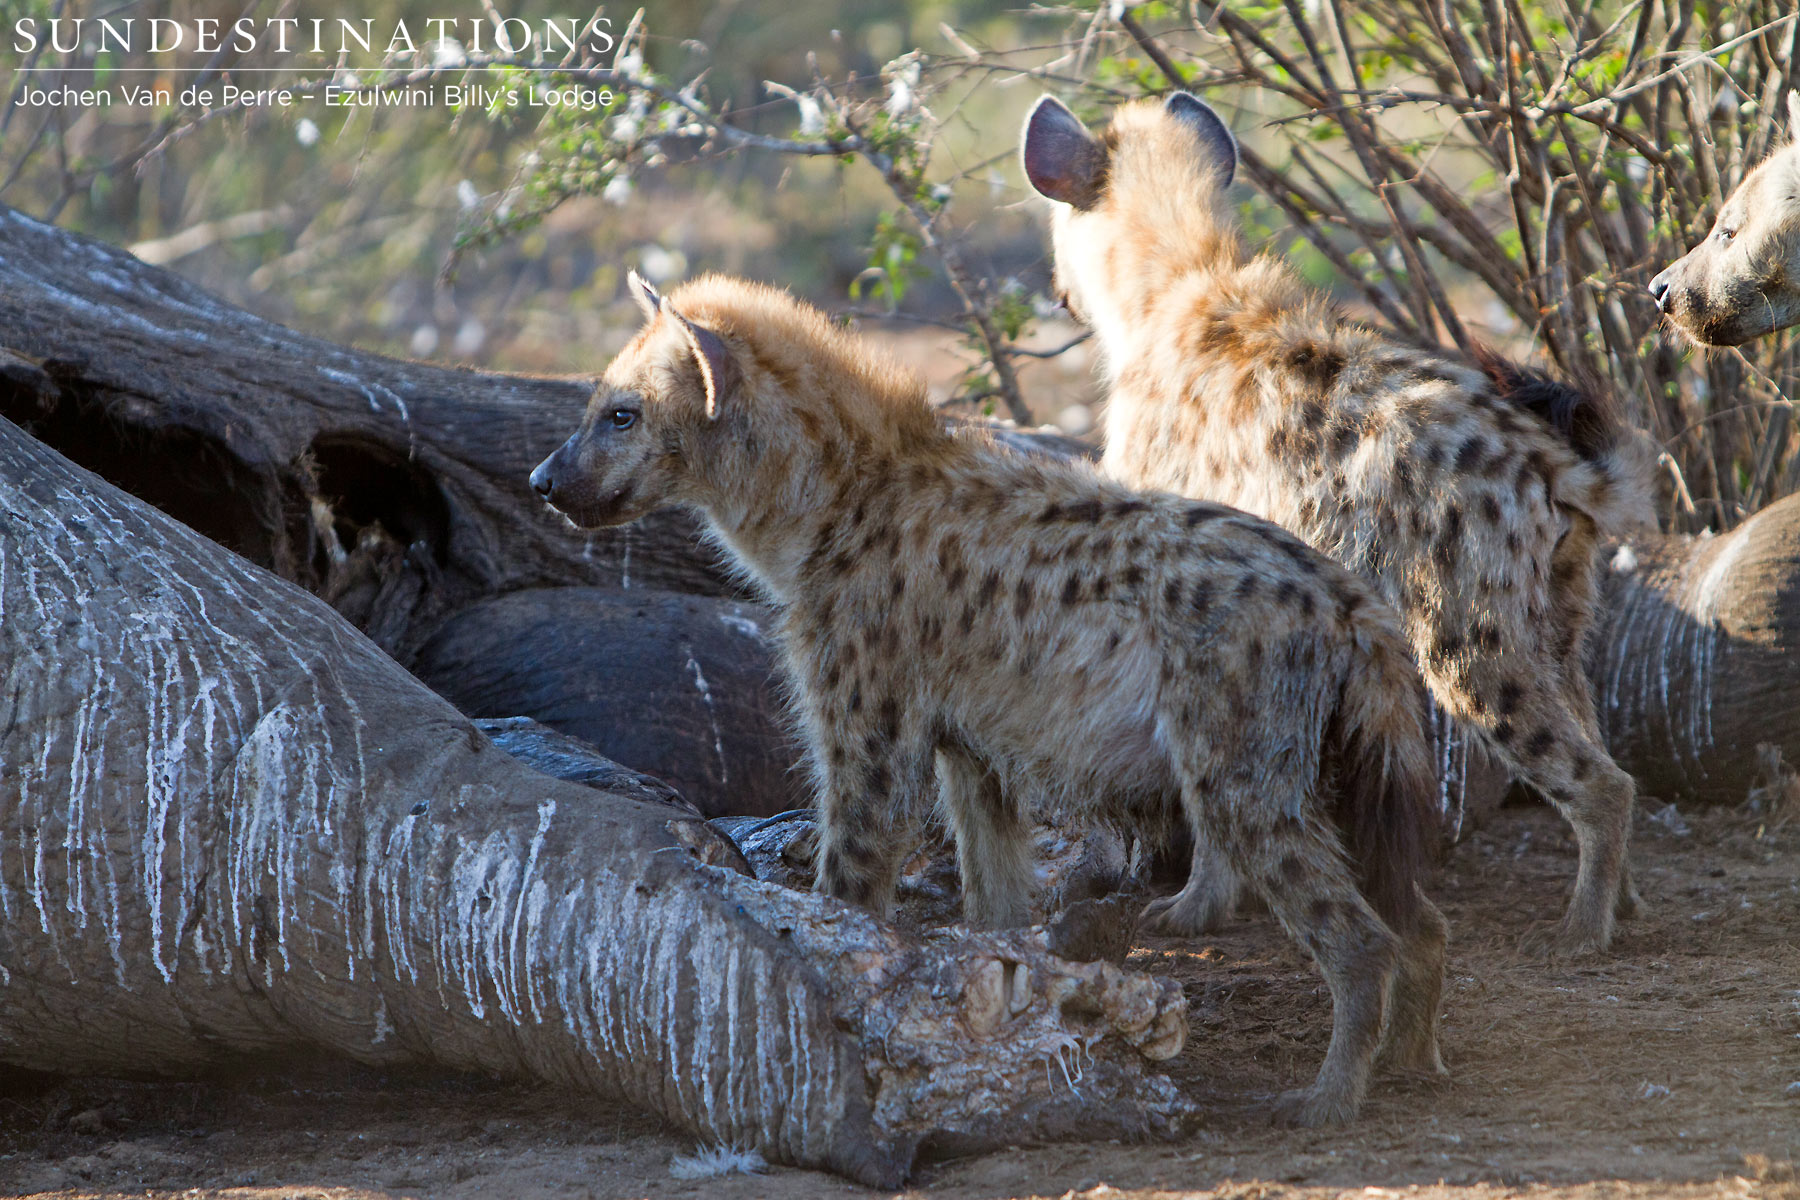 Hyena cubs enjoying the hearty meal offered by the deceased elephant